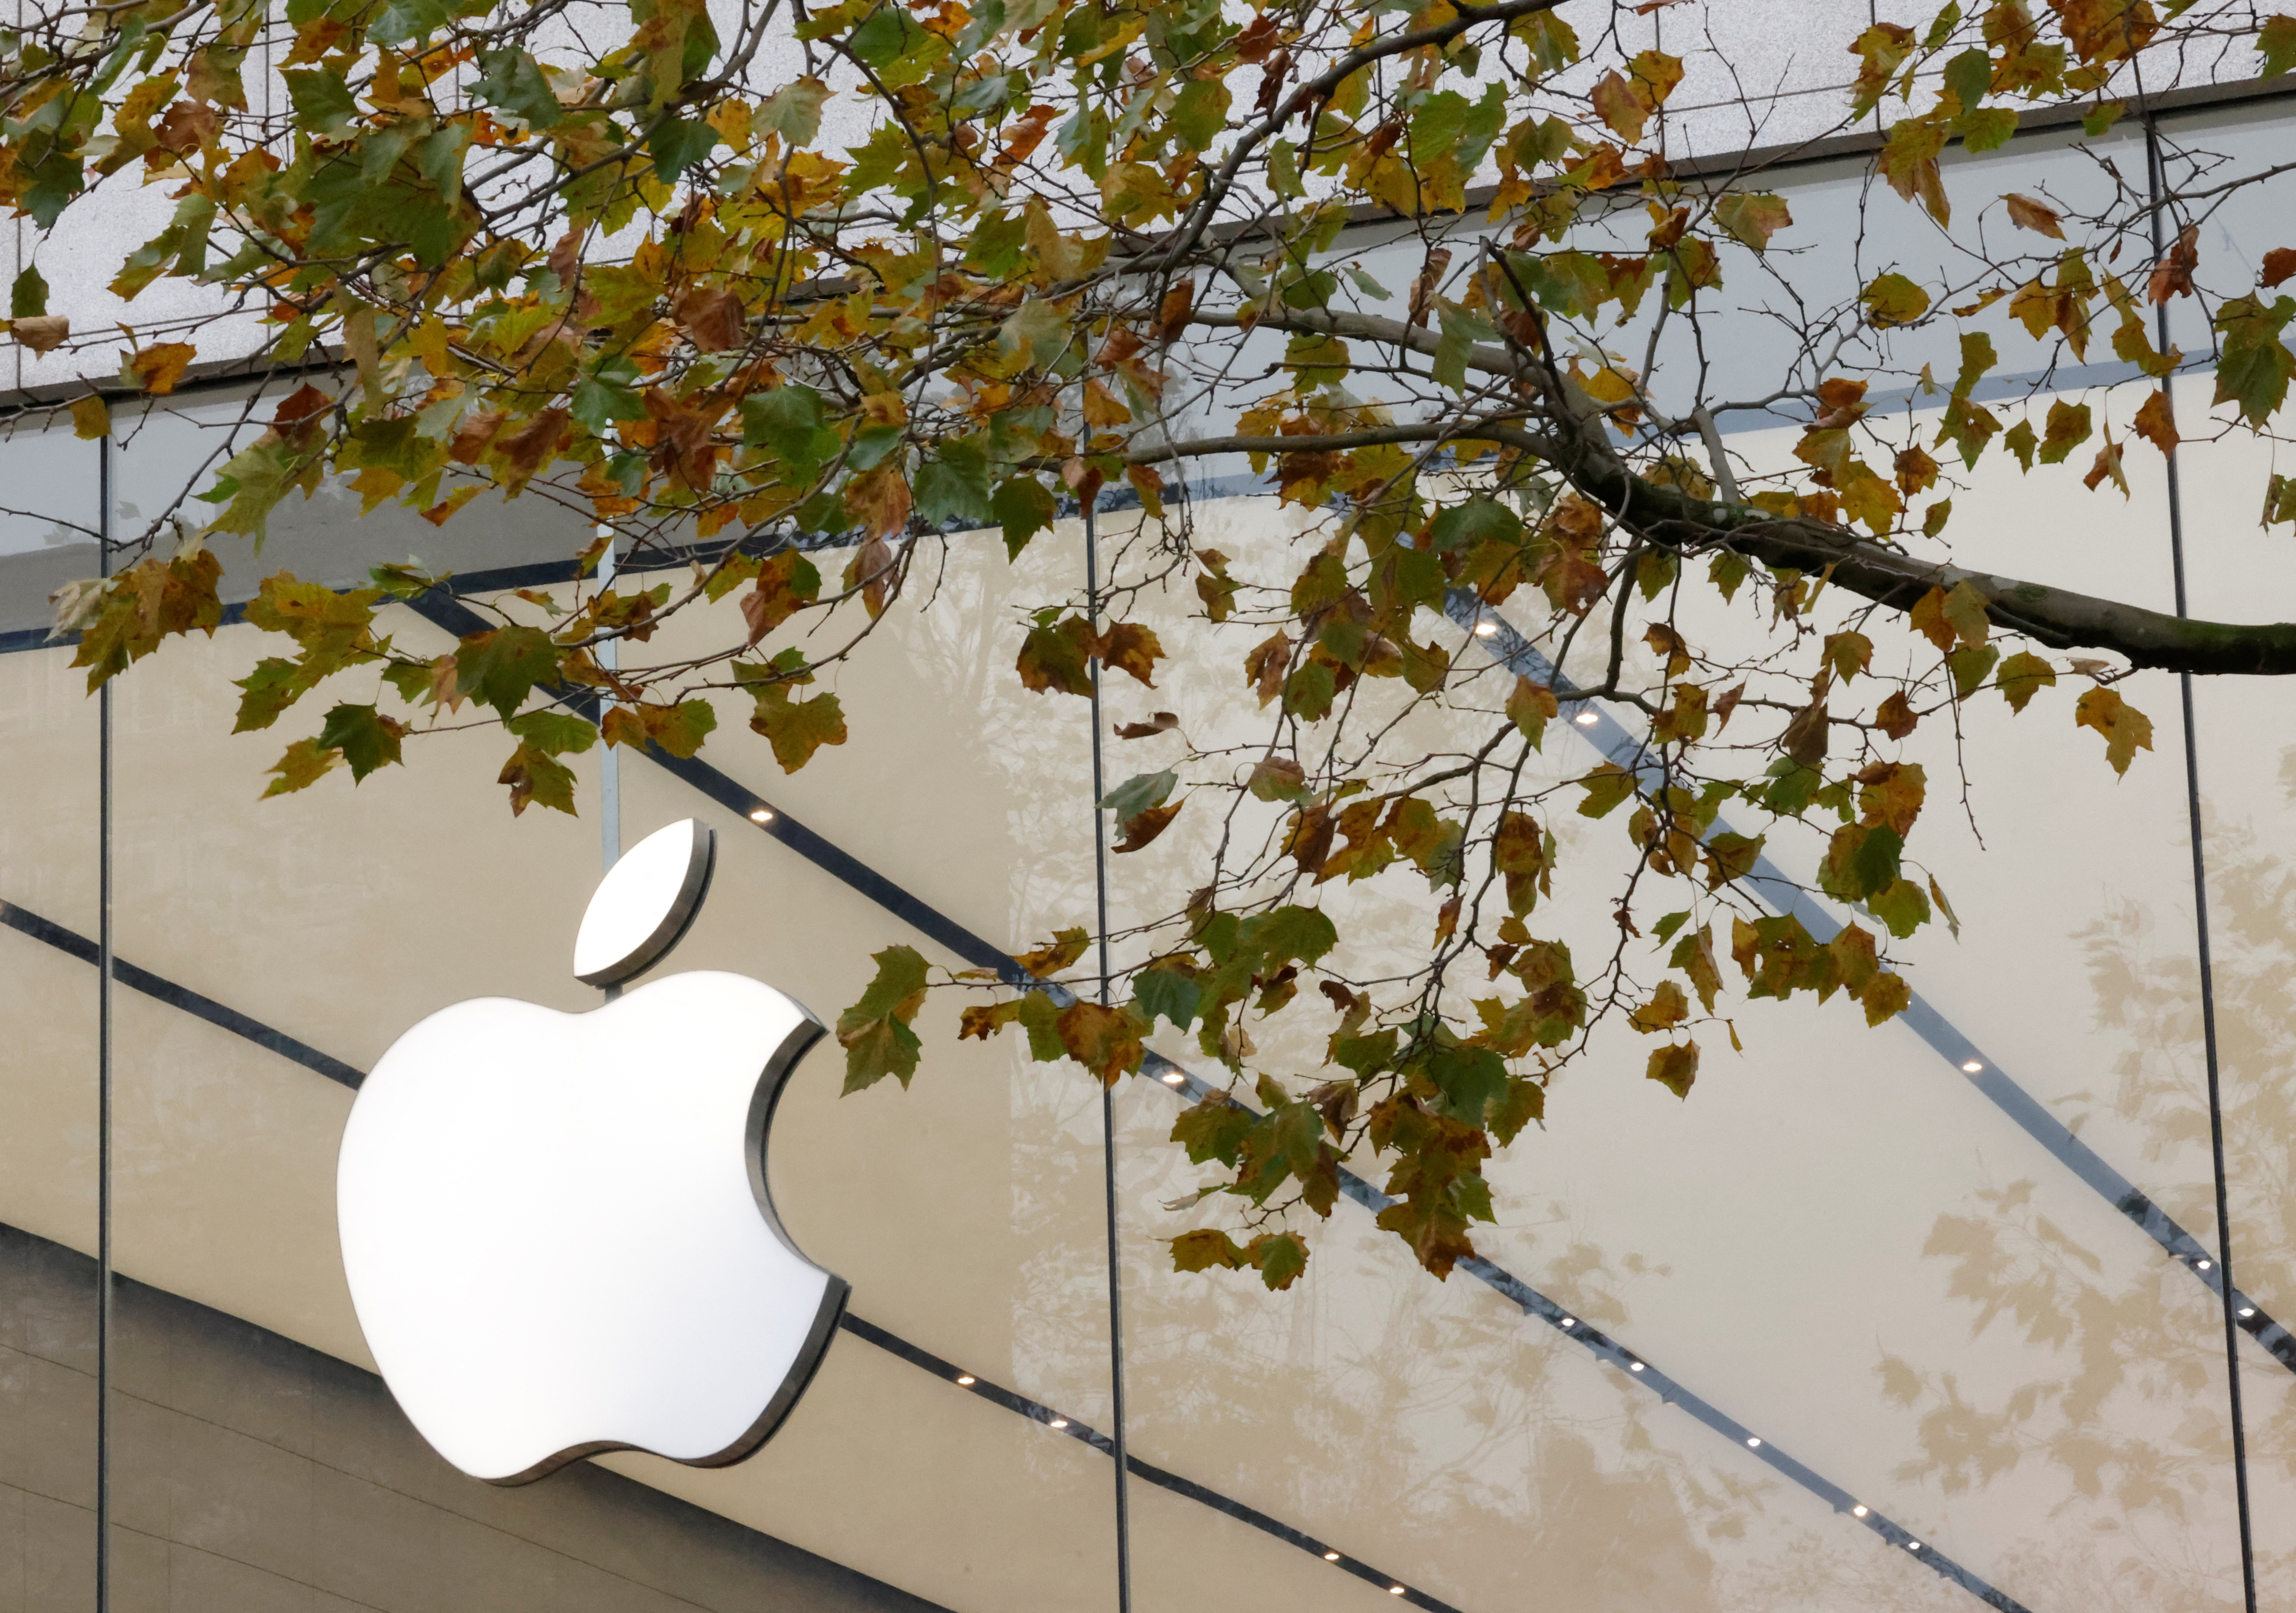 Apple will audit its labor practices in the US after union-busting accusations